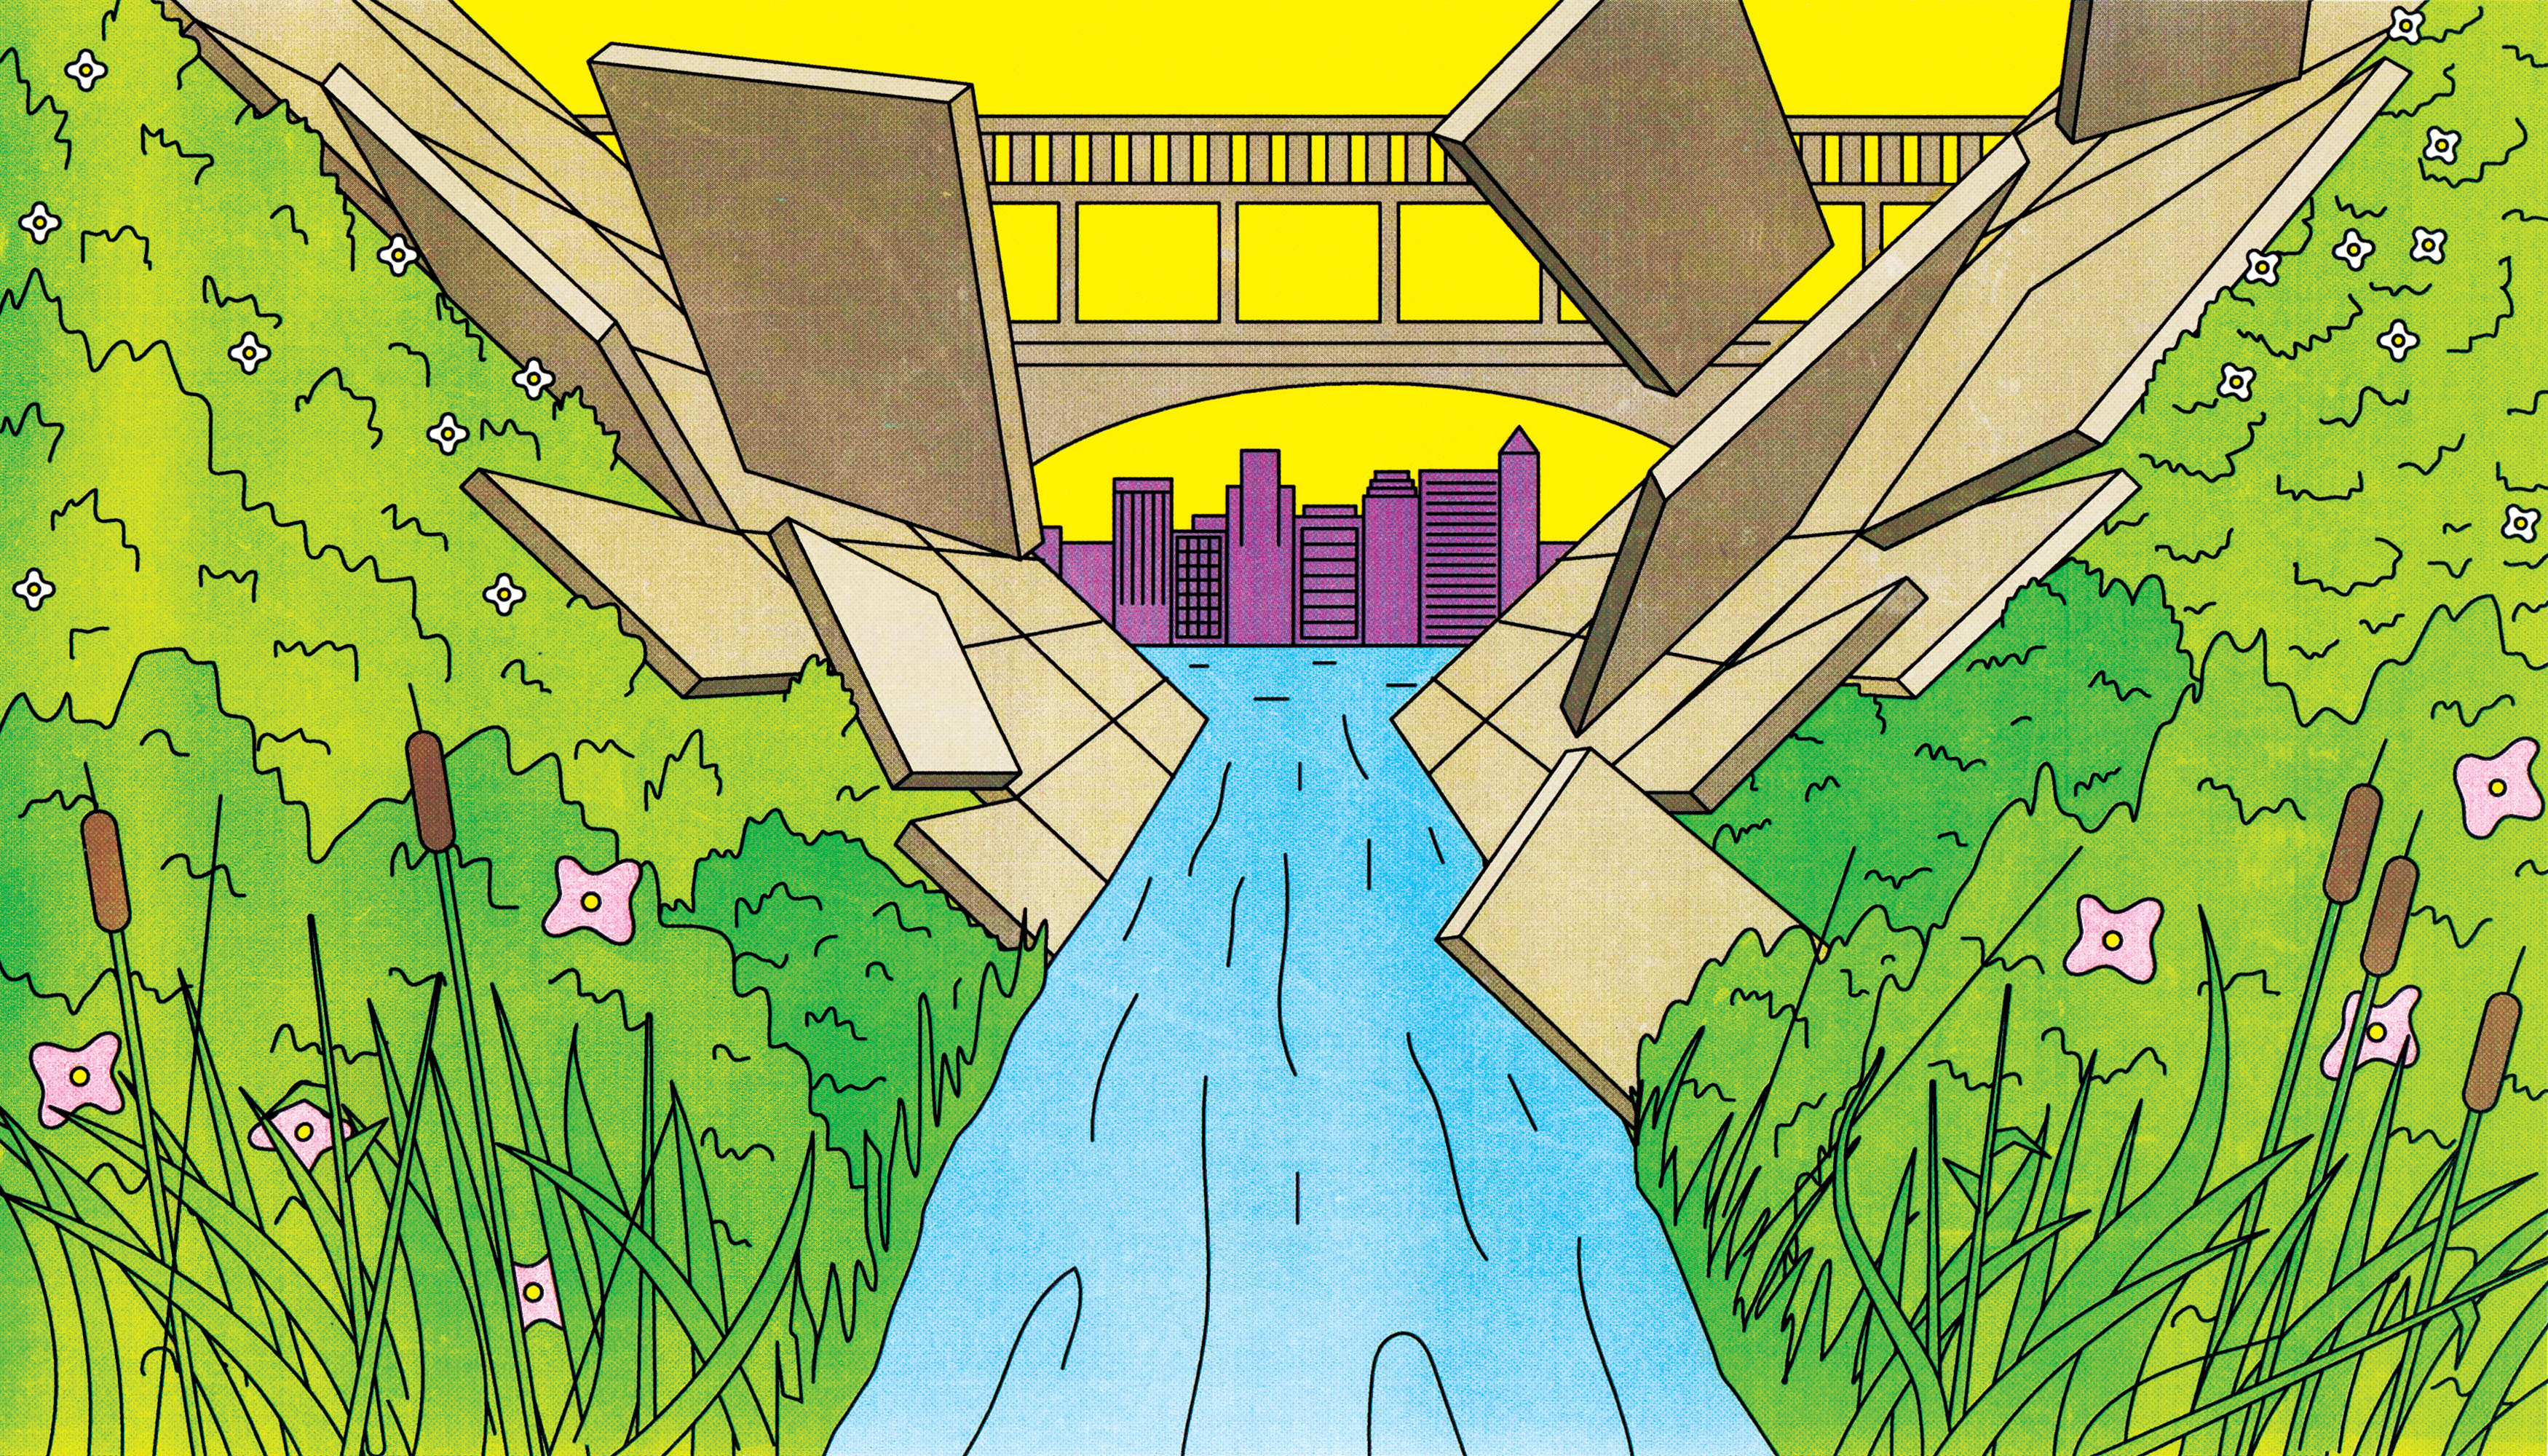 Geometric concrete slabs fit into place along a river. There’s a bridge and city landscape in the distance. Illustration.